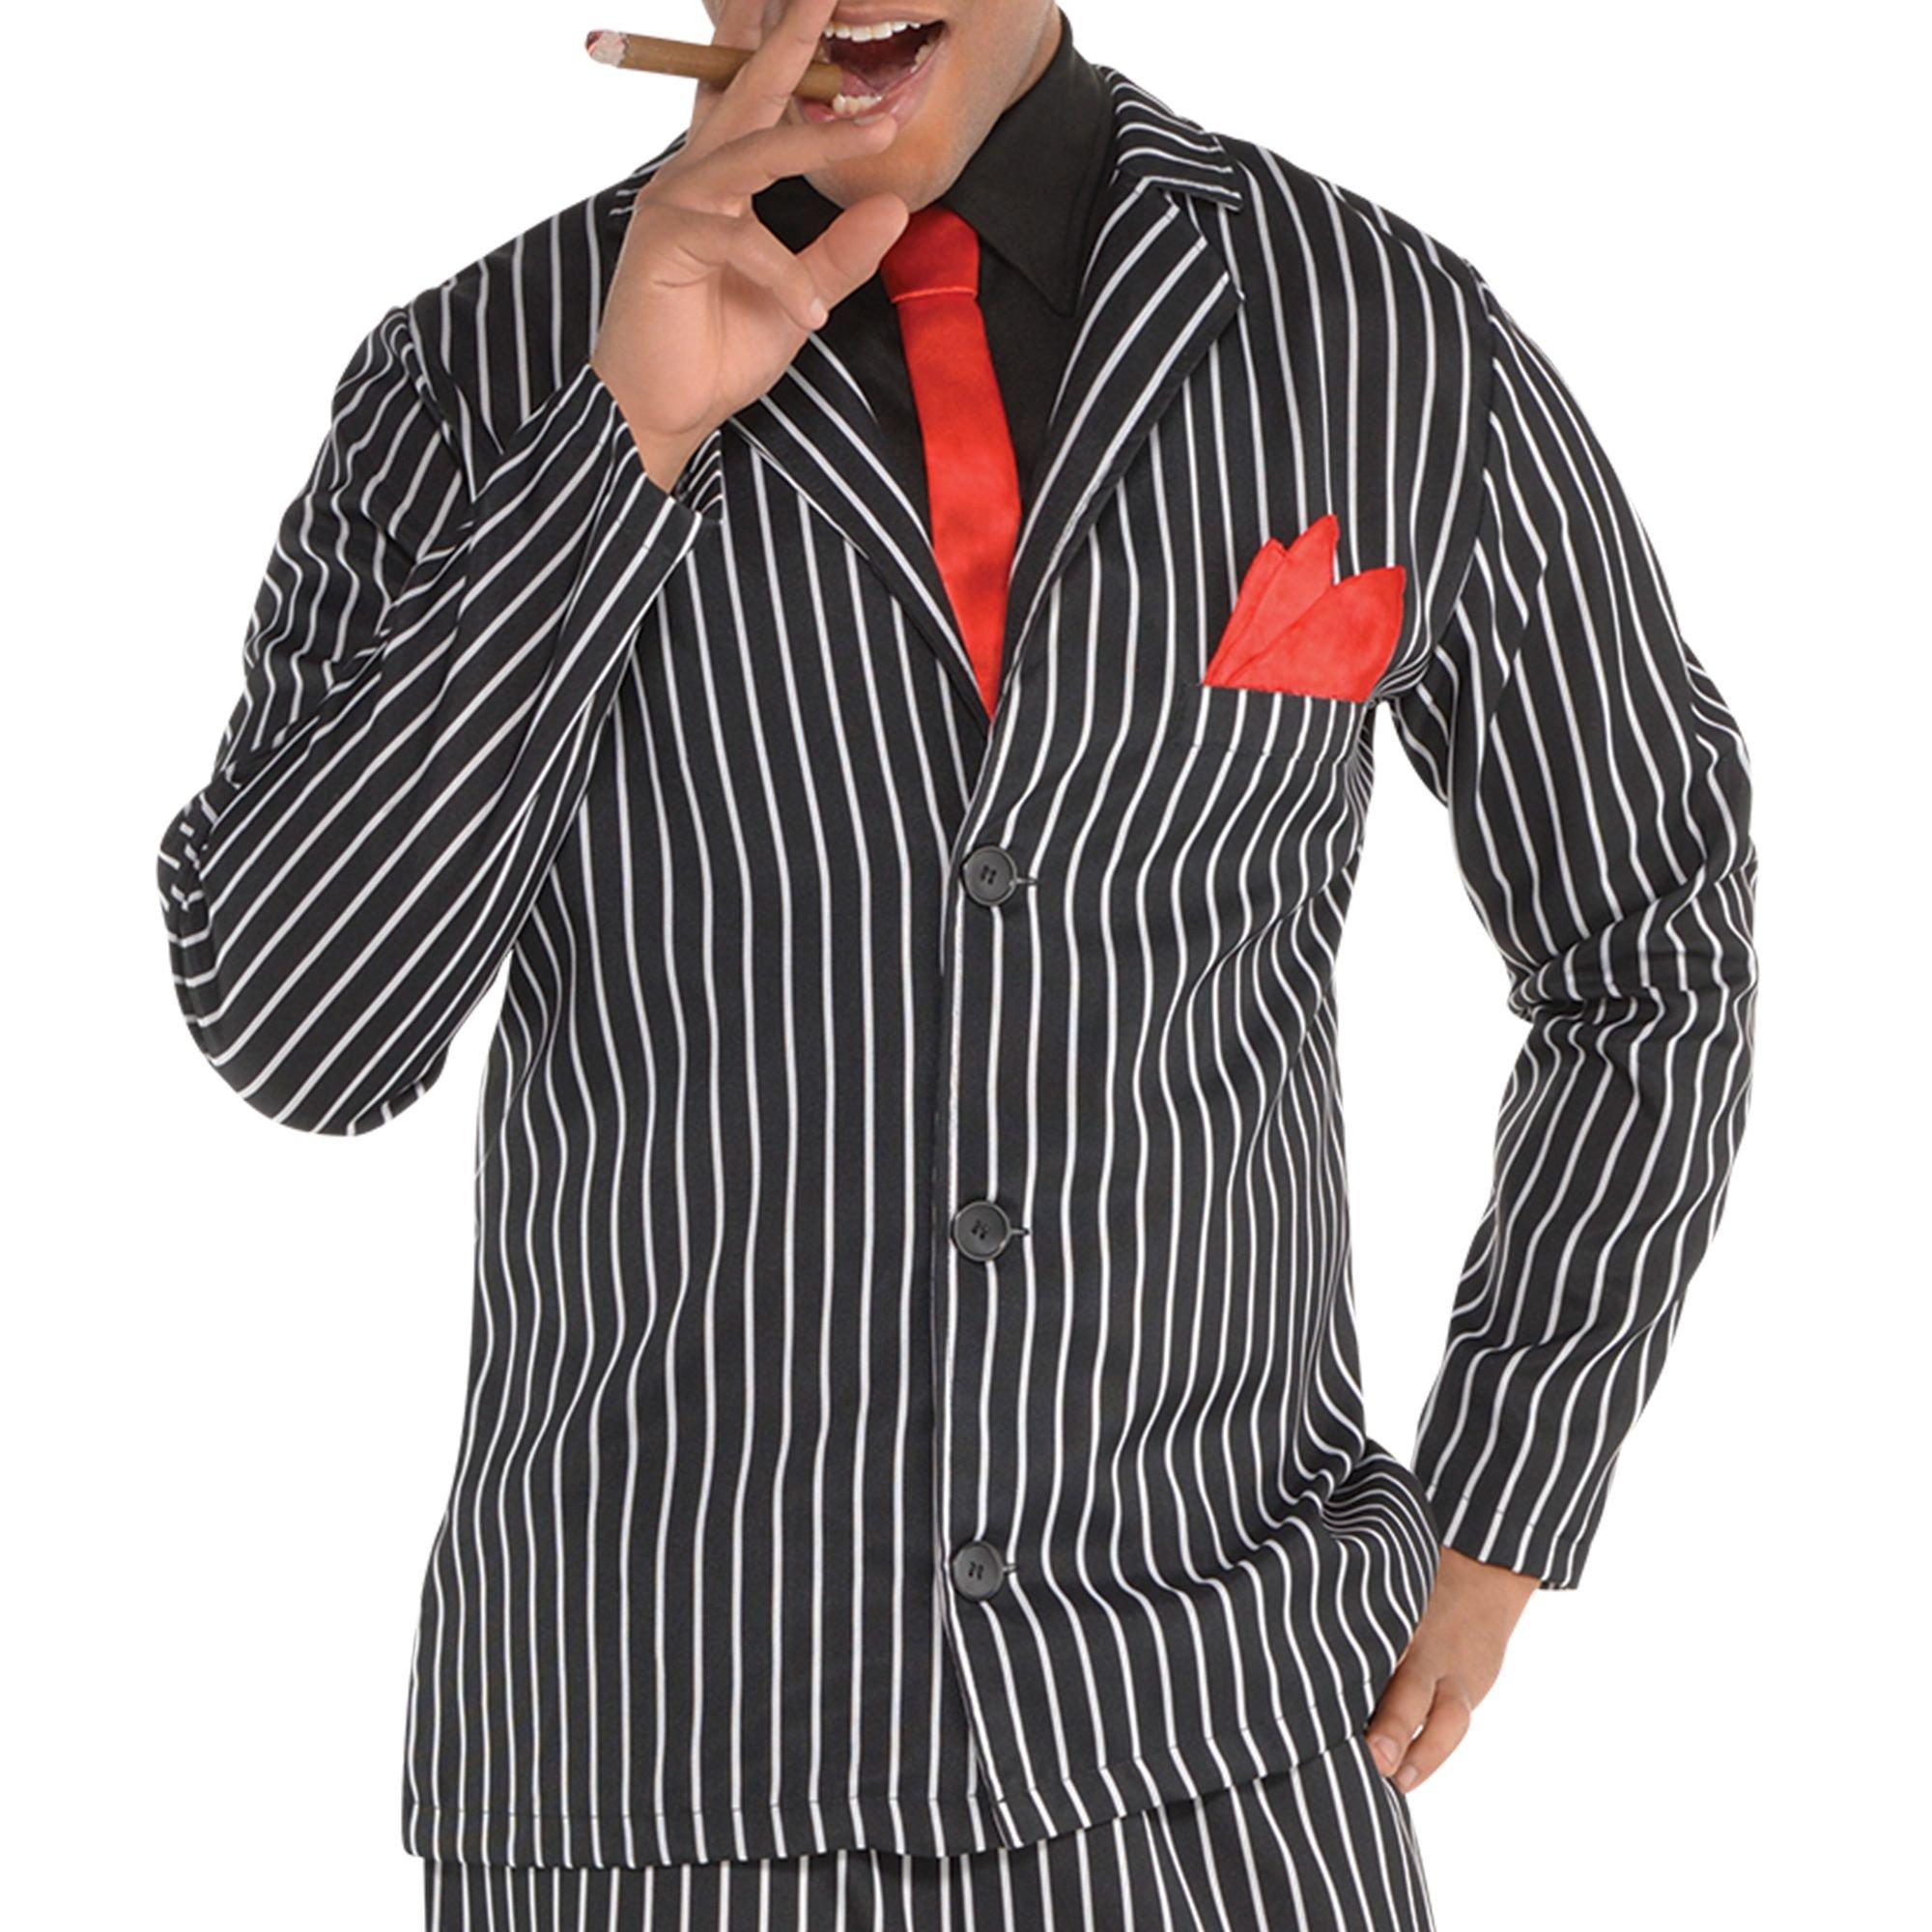 party costume of a 1920s gangster, black and white pinstripe trousers, and  matching vest, black shirt …